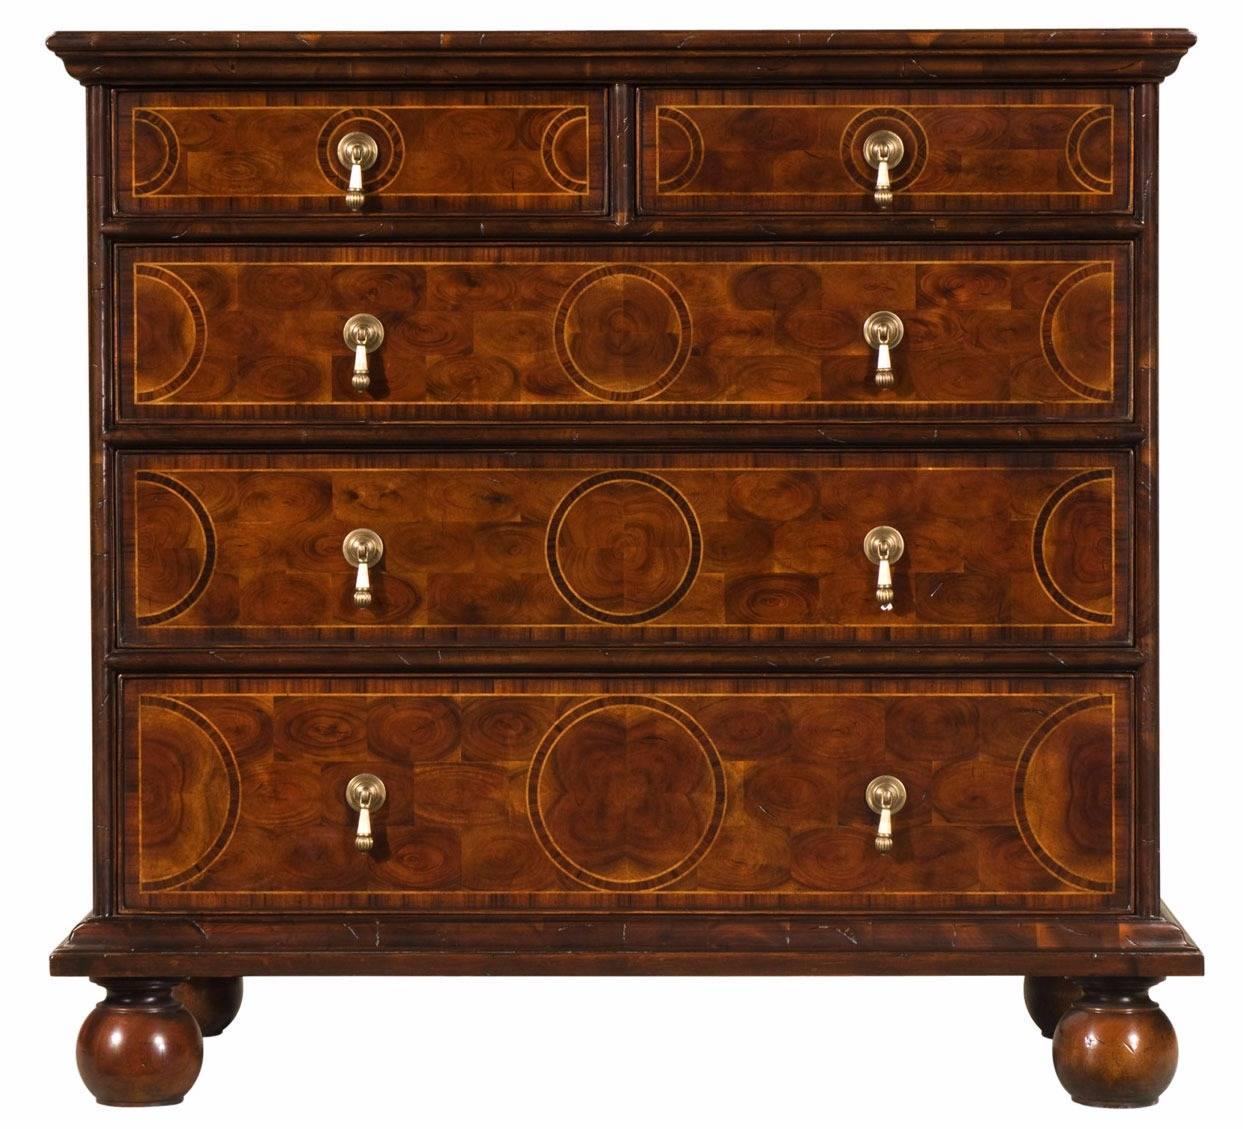 An oyster veneered chest of drawers, the rectangular parquetry inlaid top and sides with cross grain moulding, above two short and three long graduated drawers with brass and bone drop handles, on bun feet. The original William and Mary.